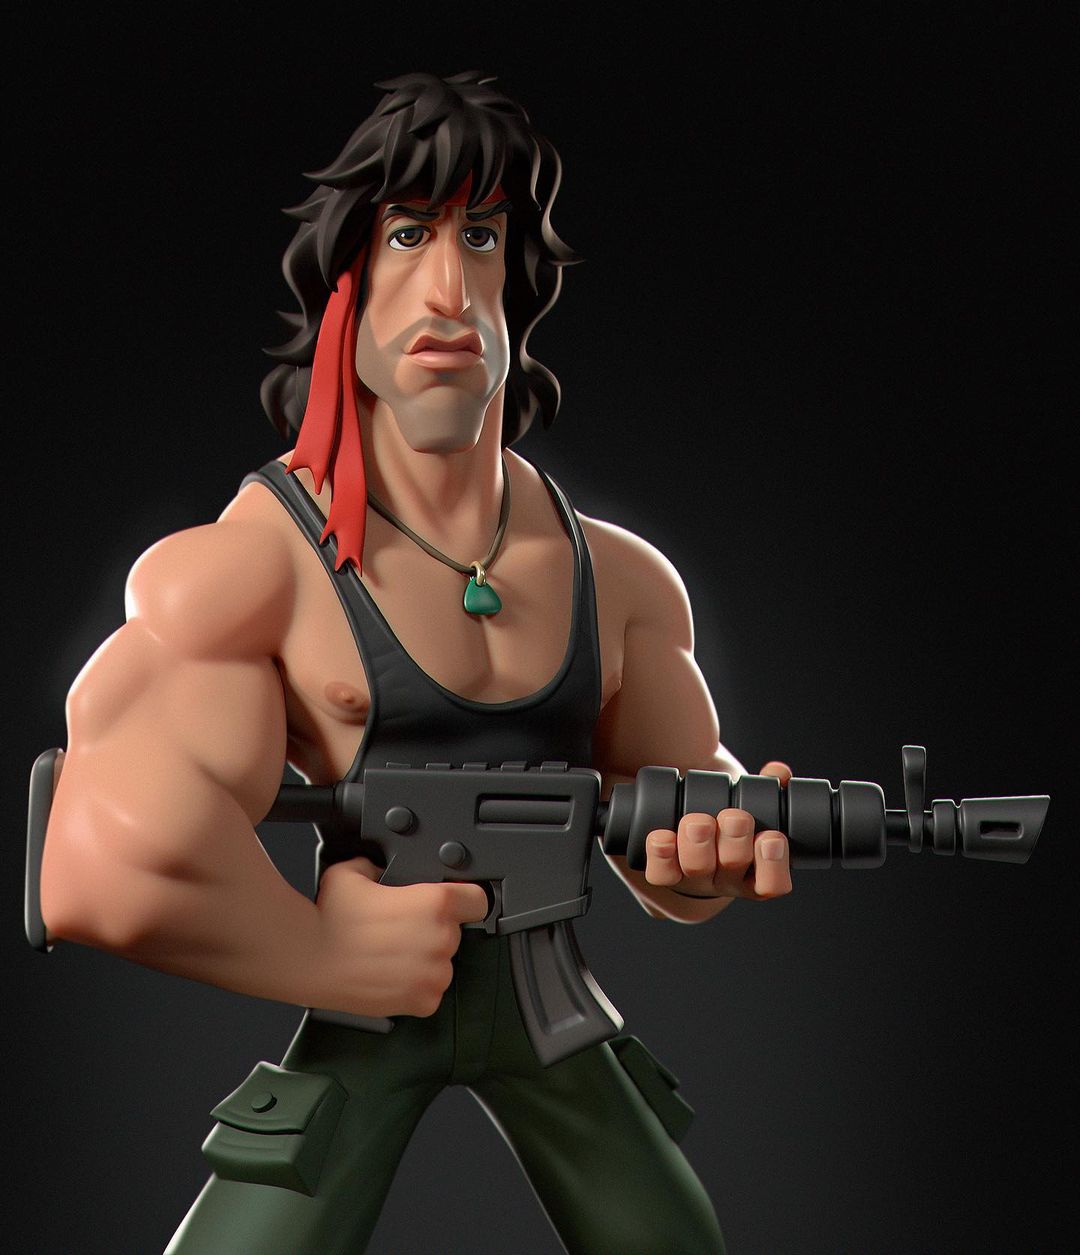 funny 3d model character rambo by gabriel soares